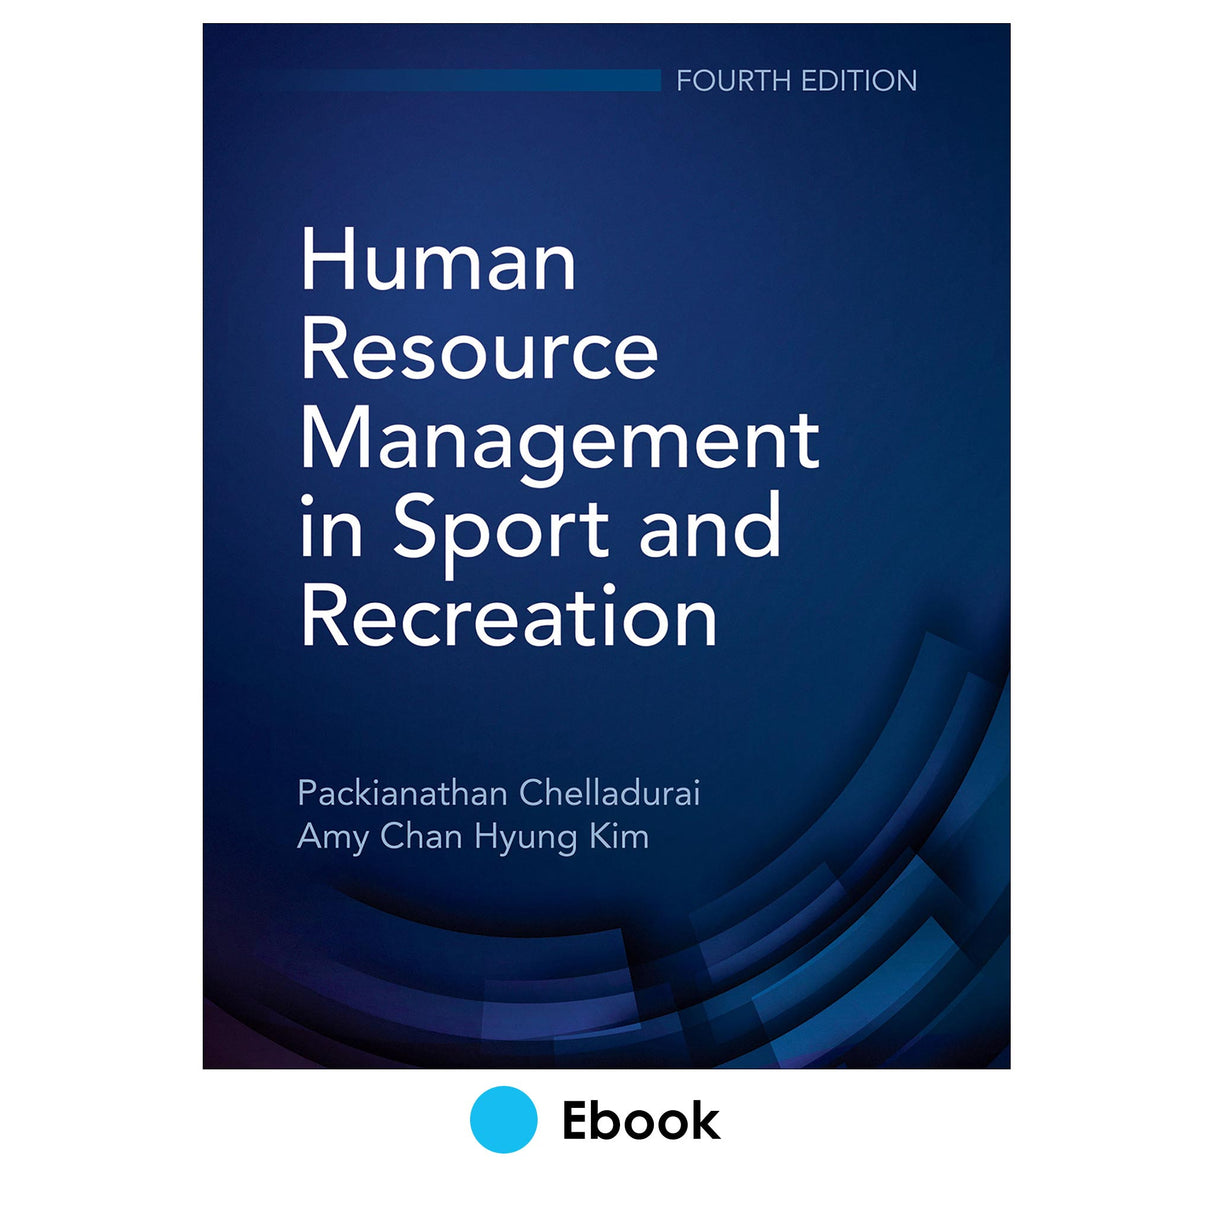 Human Resource Management in Sport and Recreation 4th Edition epub